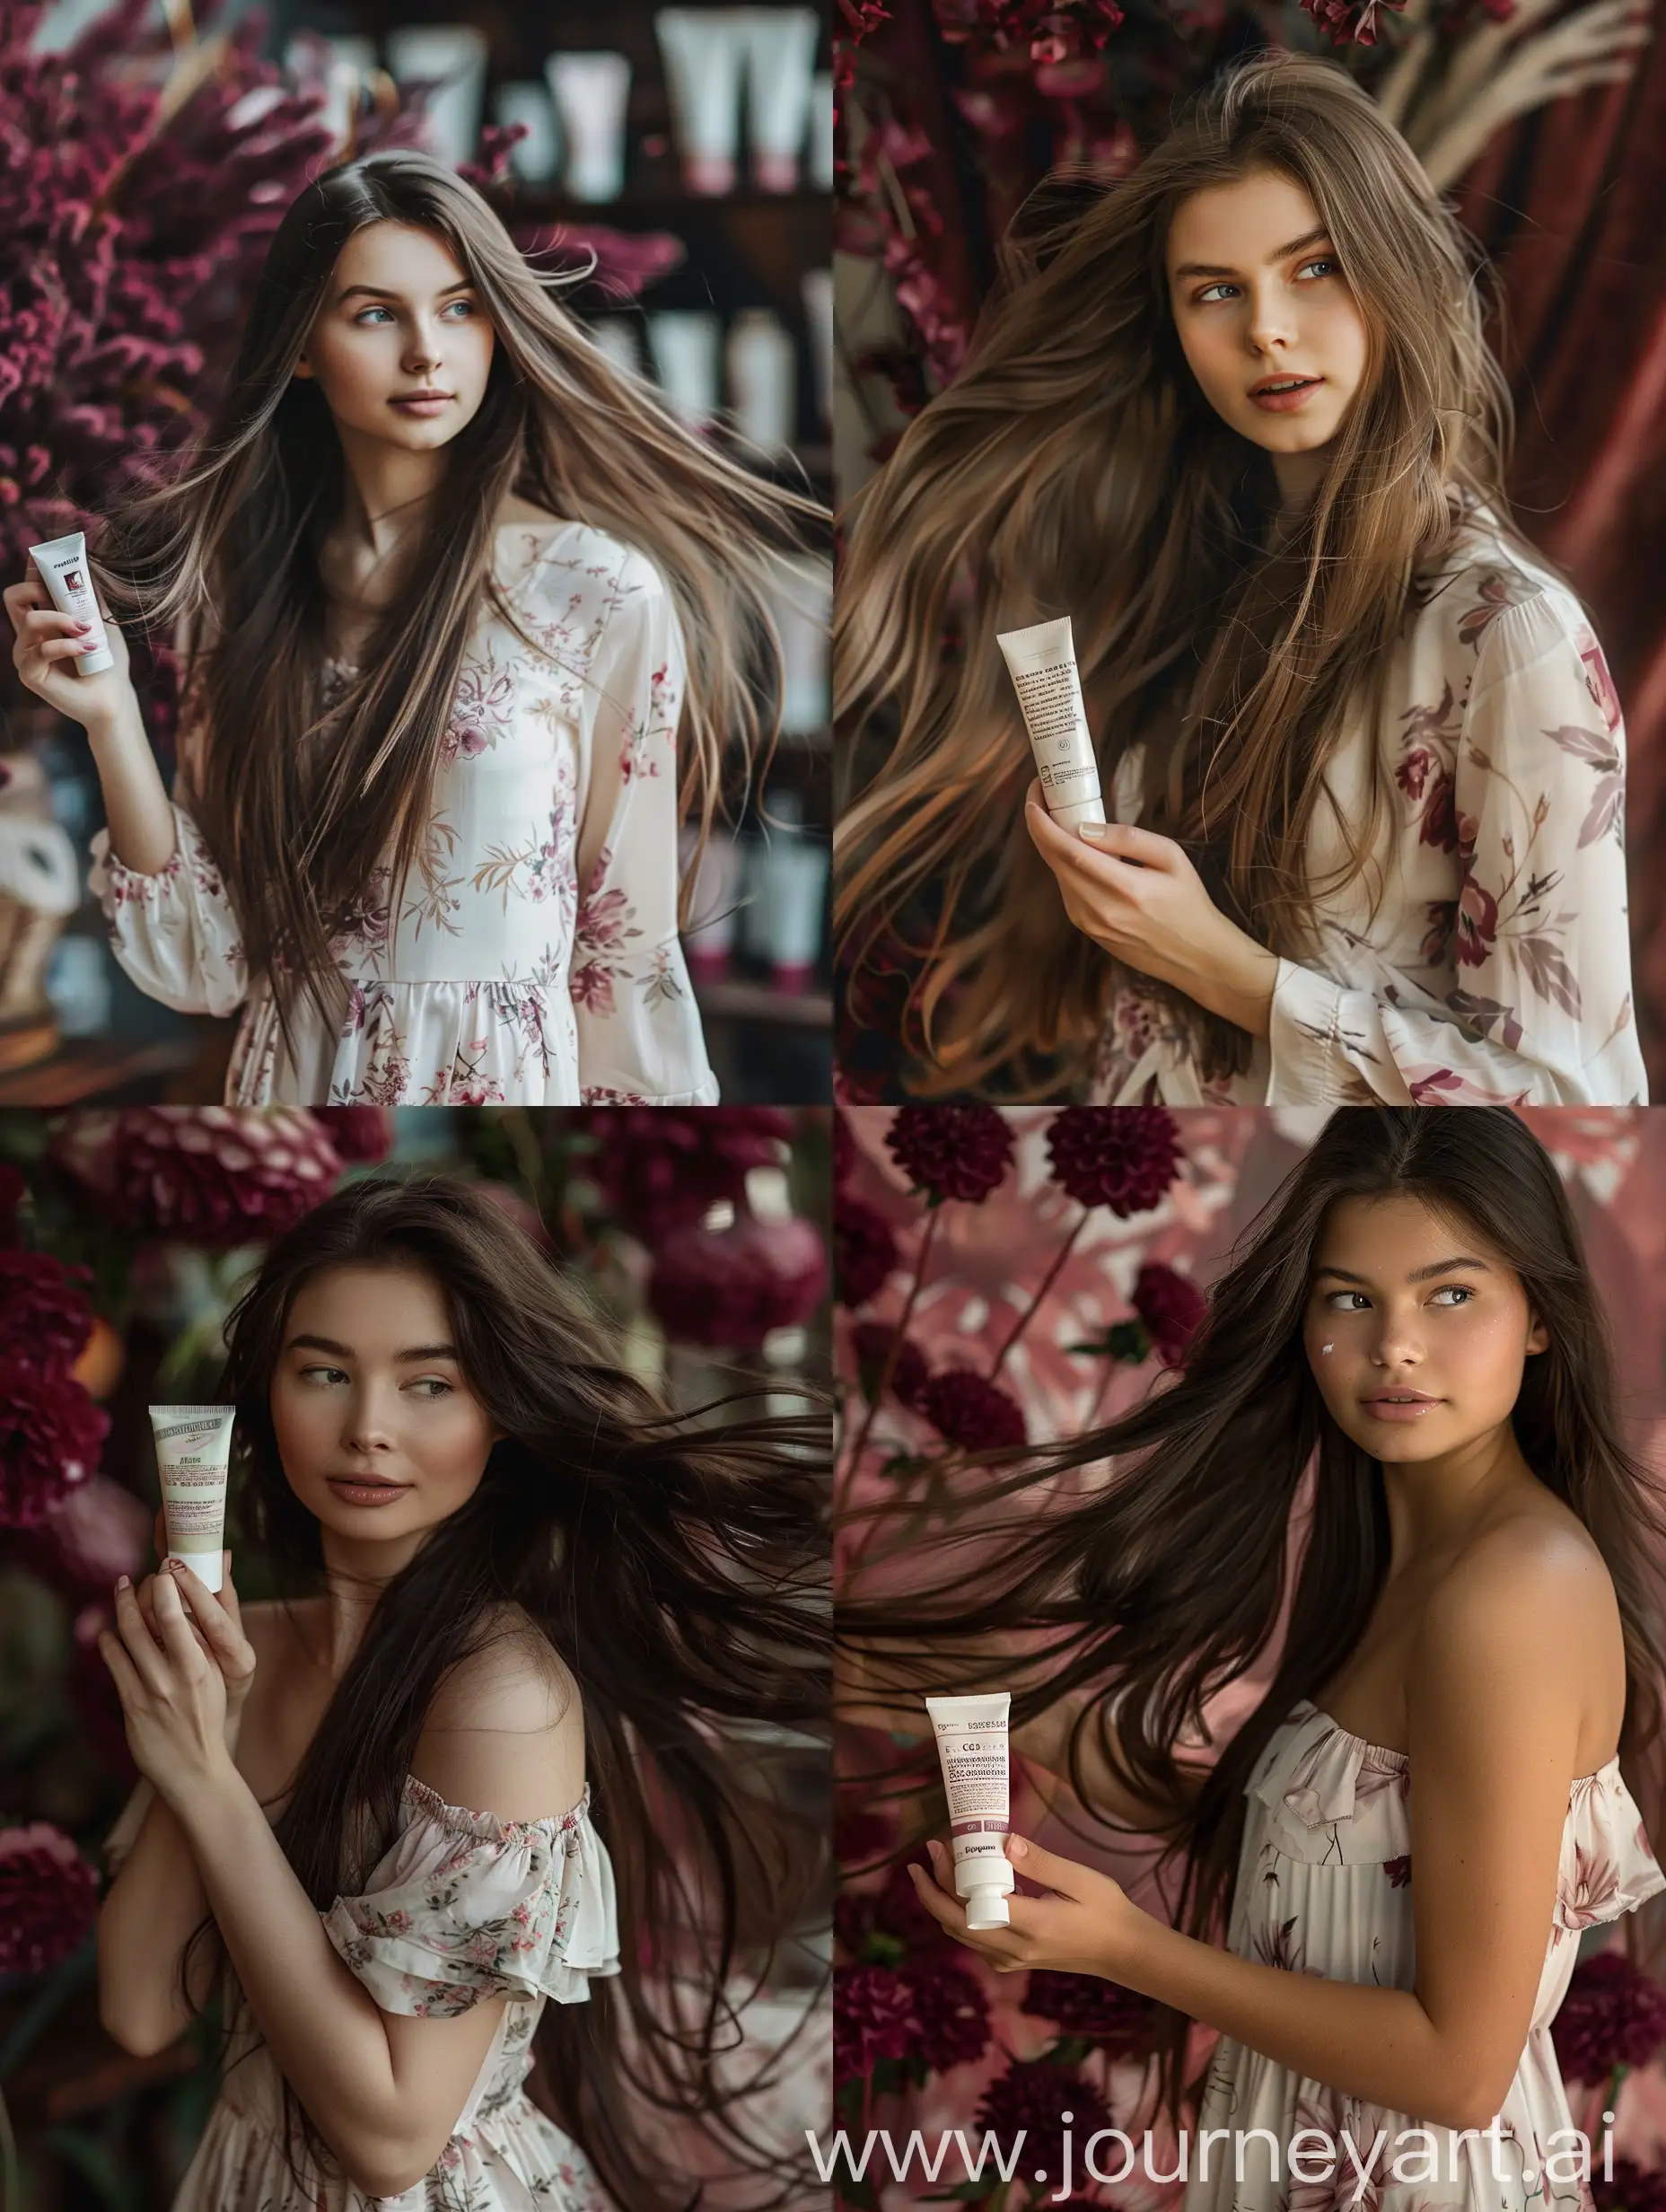 Realistic photo: a beautiful girl with long flowing hair holding a tube of cream in her hand. She is wearing a light floral dress. Maroon flowers are visible in the background.